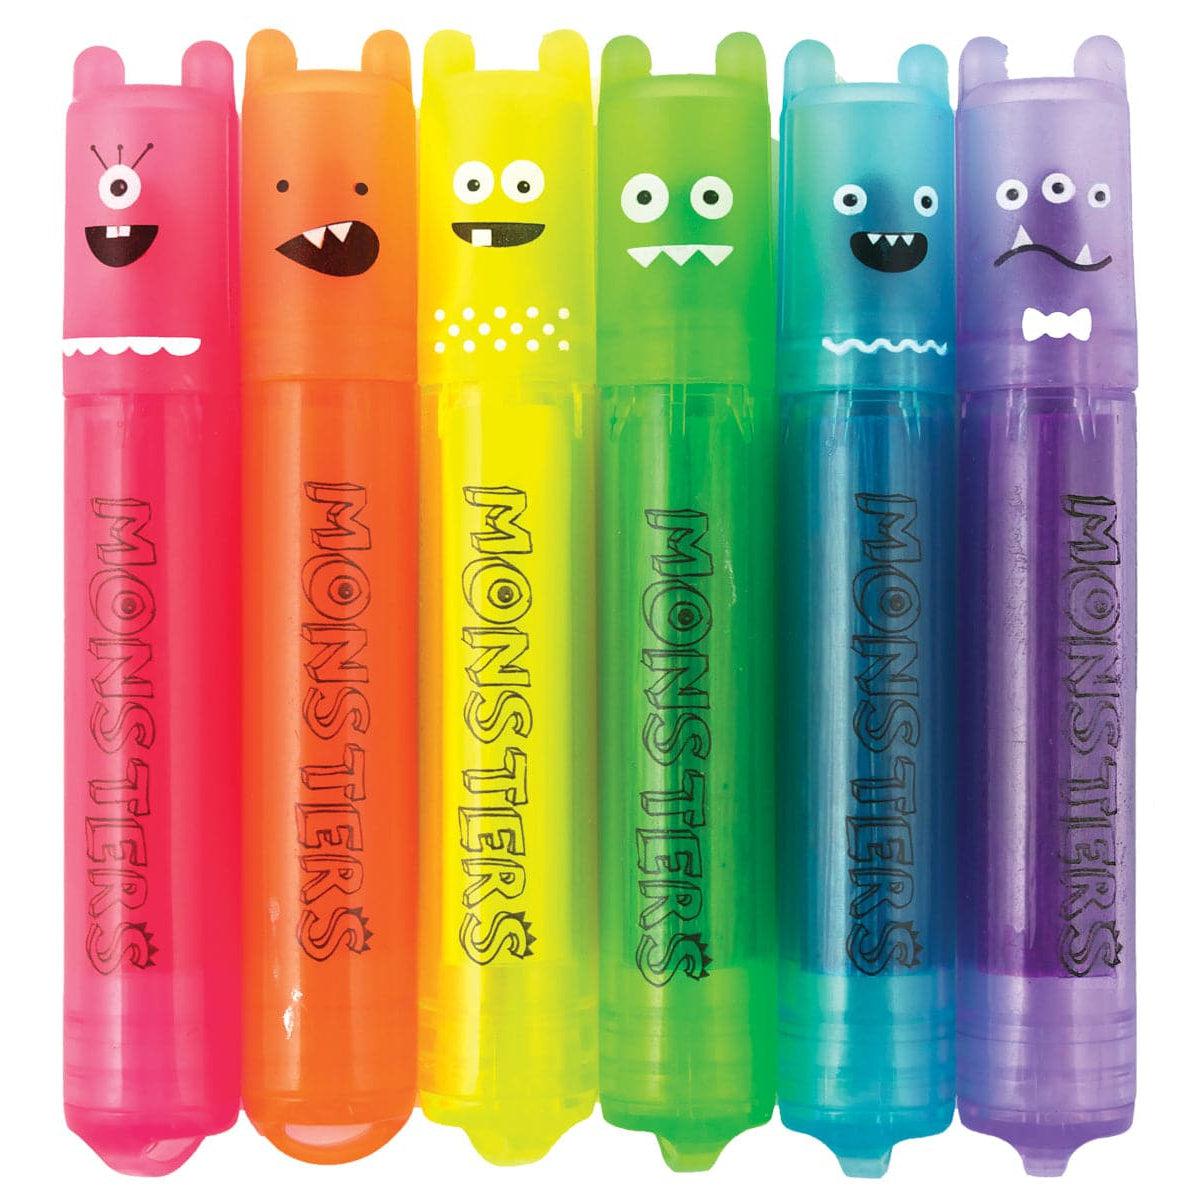 Ooly-Mini Monster Scented Highlighters - Set of 6-130-24-Legacy Toys